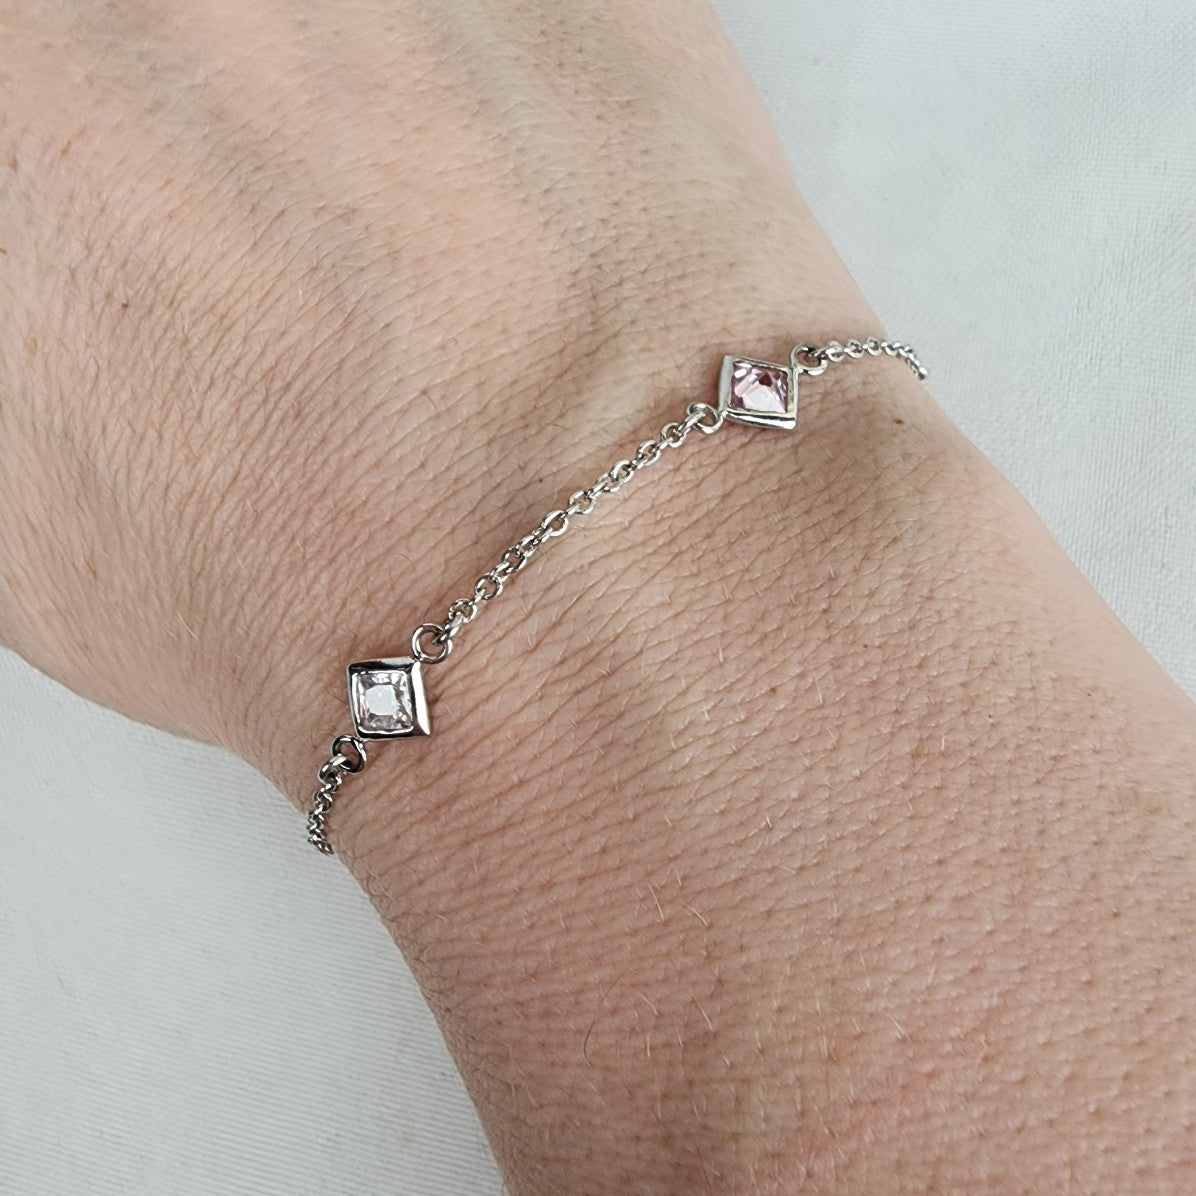 925 Sterling Silver Pink & Clear Faceted Stone Chain Bracelet